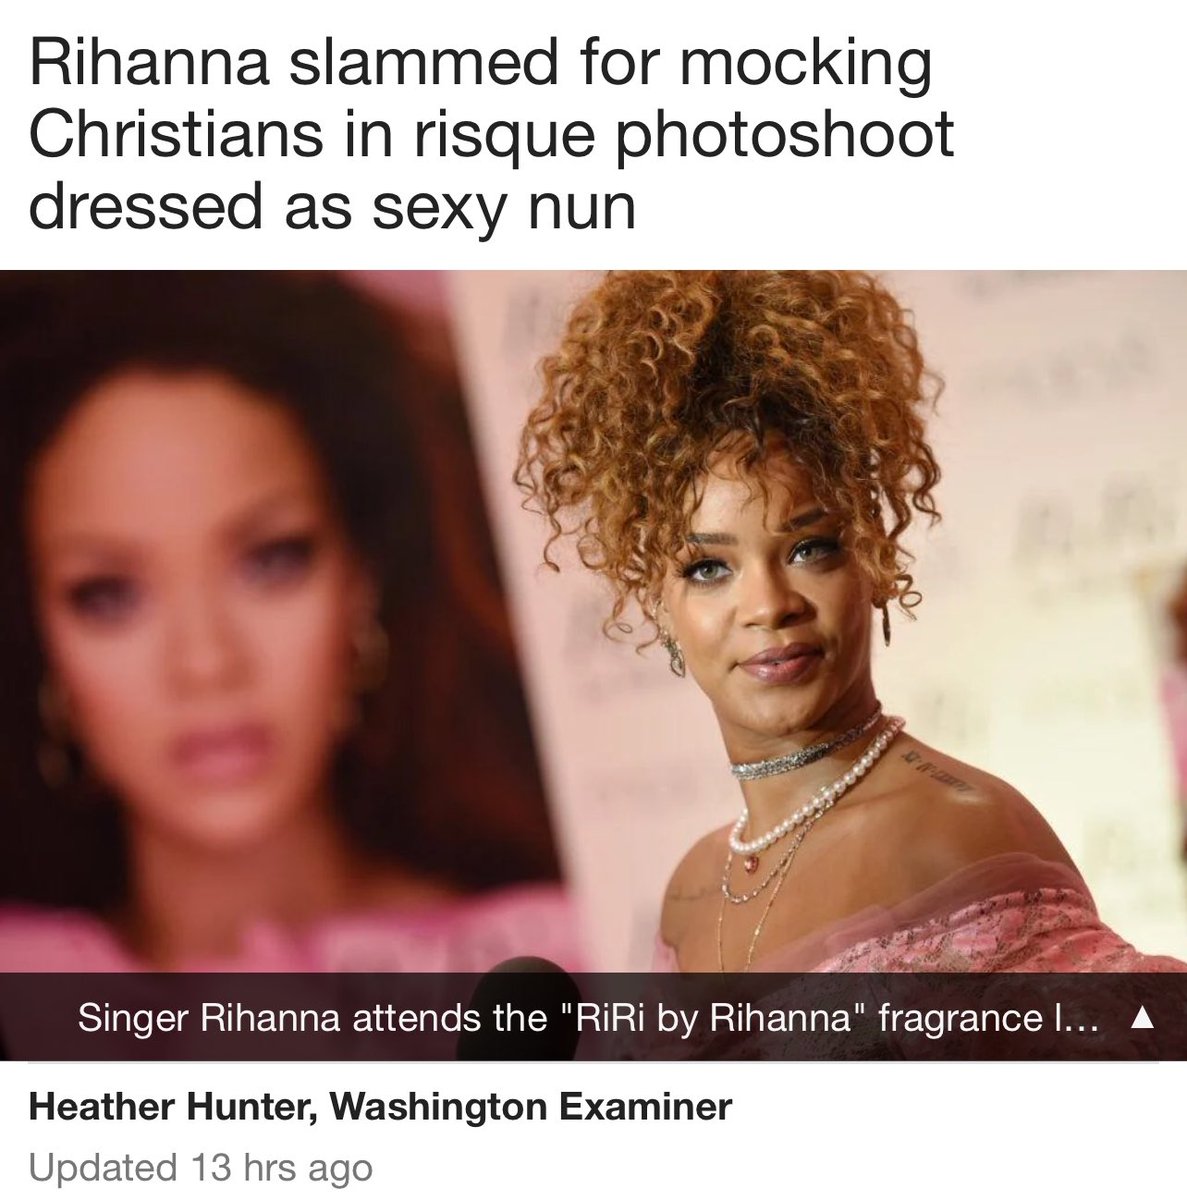 It’s interesting to me that conservative Christian types are up in arms claiming Rhianna playing dress up as a nun offensively mocks their religion and yet those very same people are vehemently against Native Americans who state that mascots are mockery. That’s called hypocrisy!